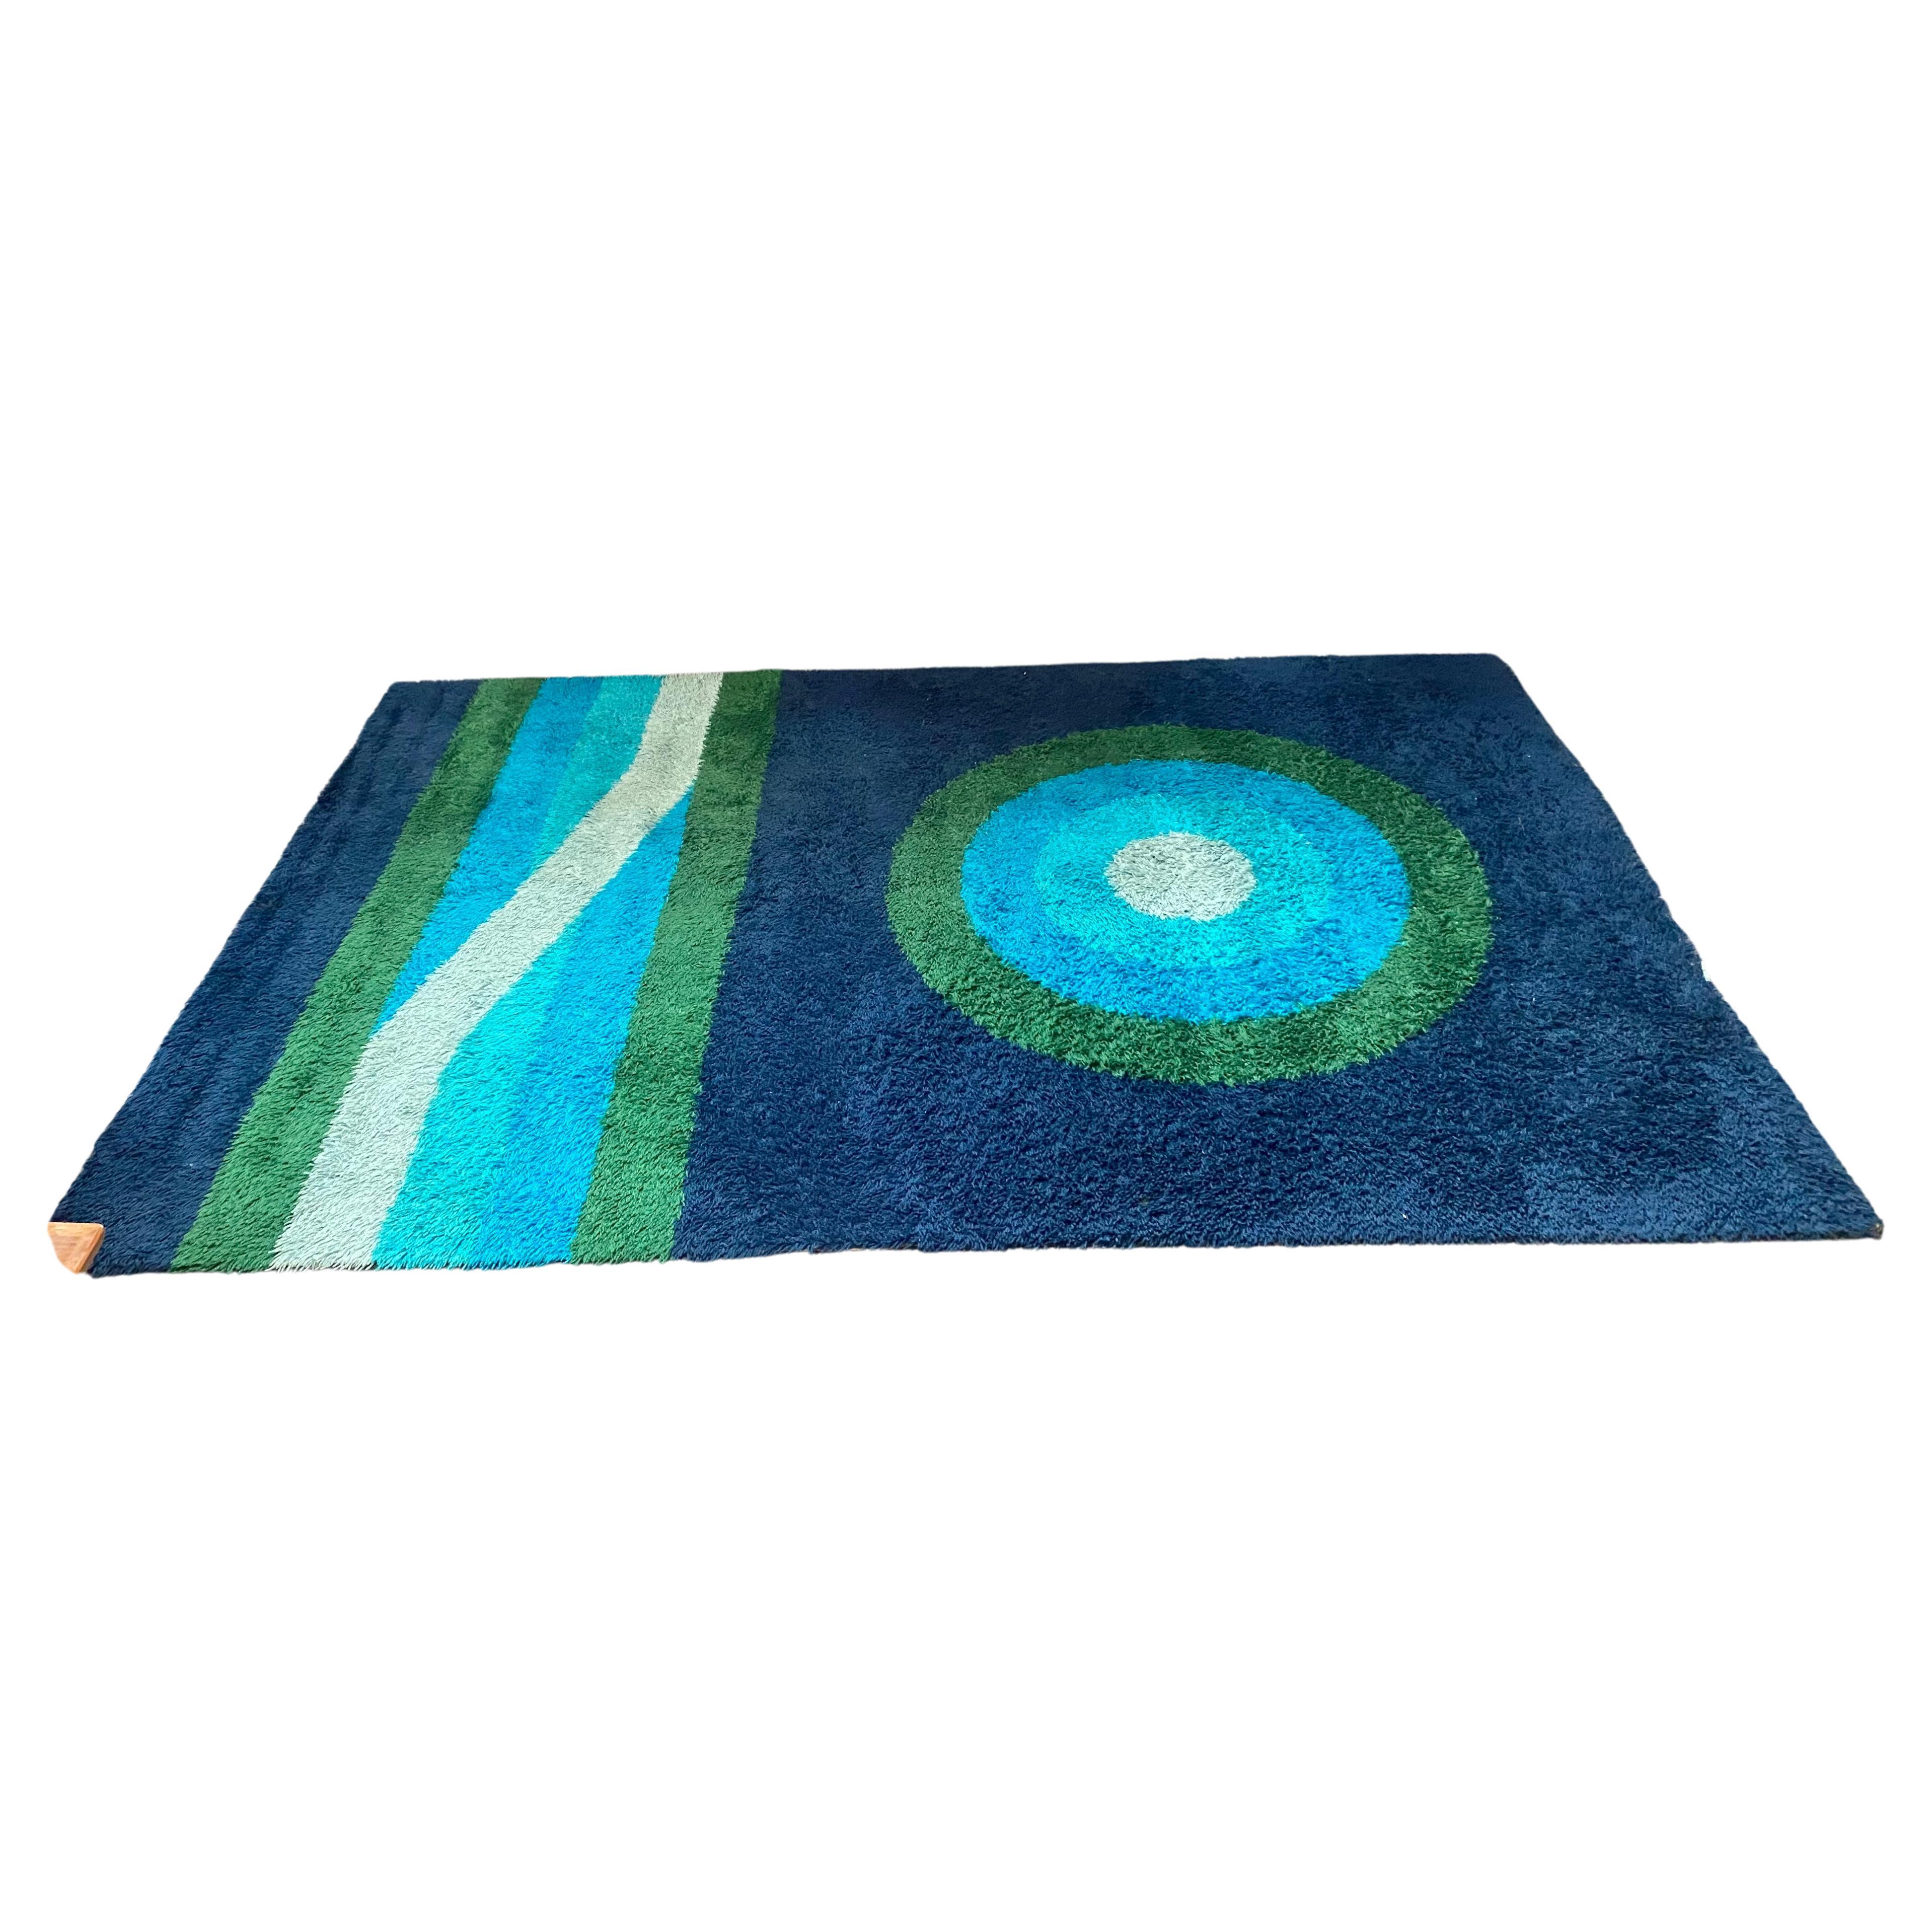 Modernist Abstract Ege Rya Rug, 9 x 7, Blues and Greens  For Sale